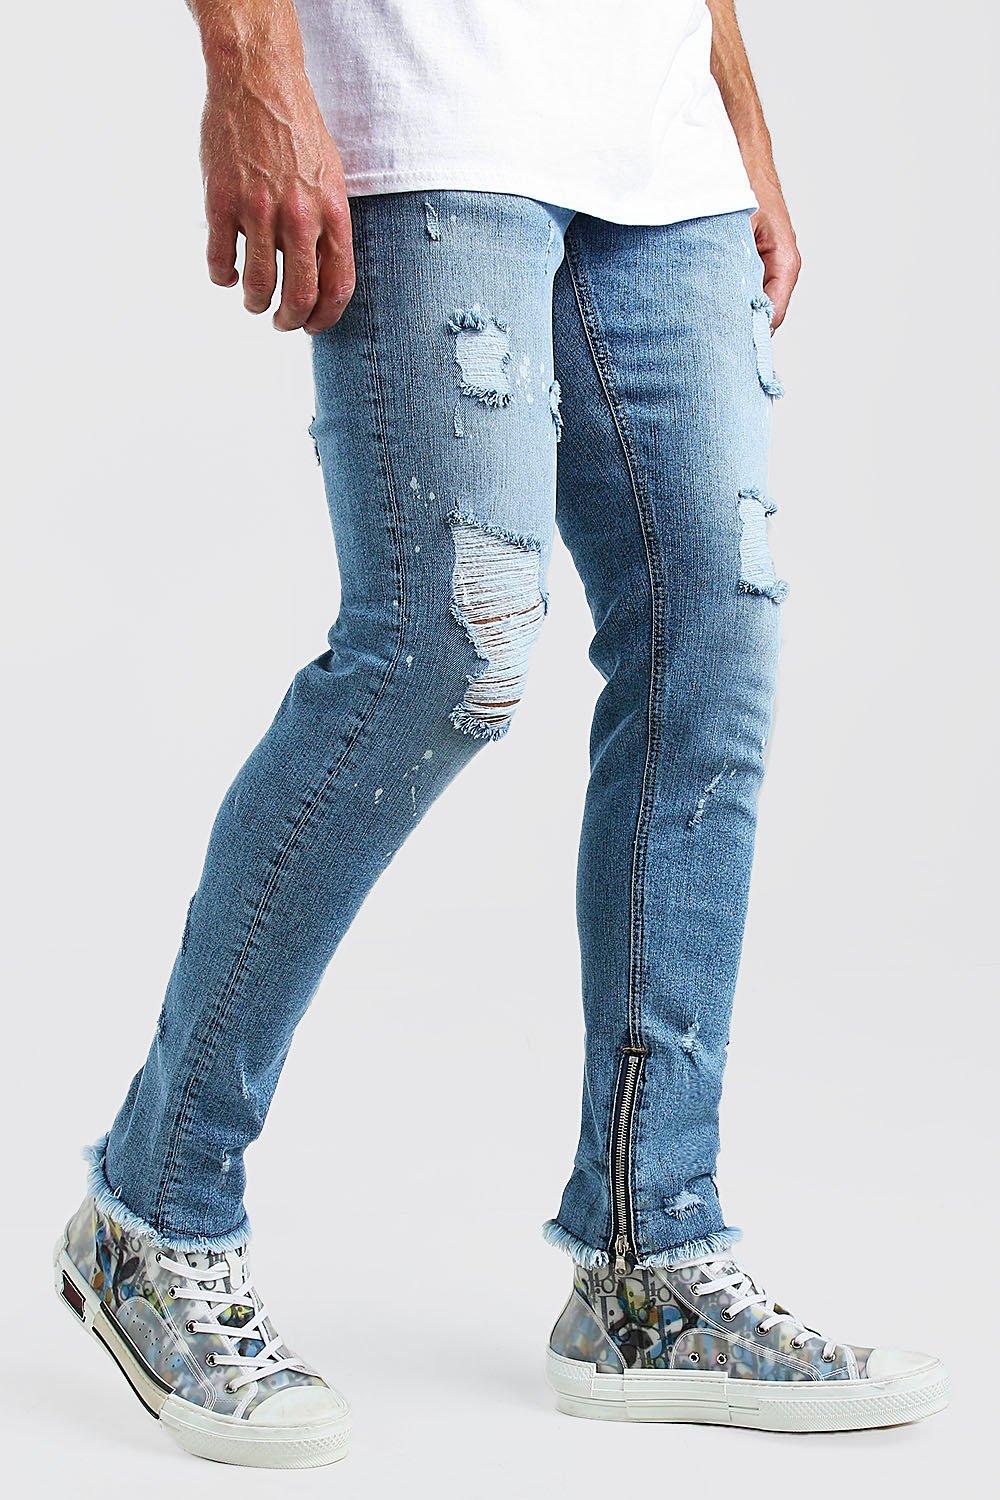 ripped jeans canada